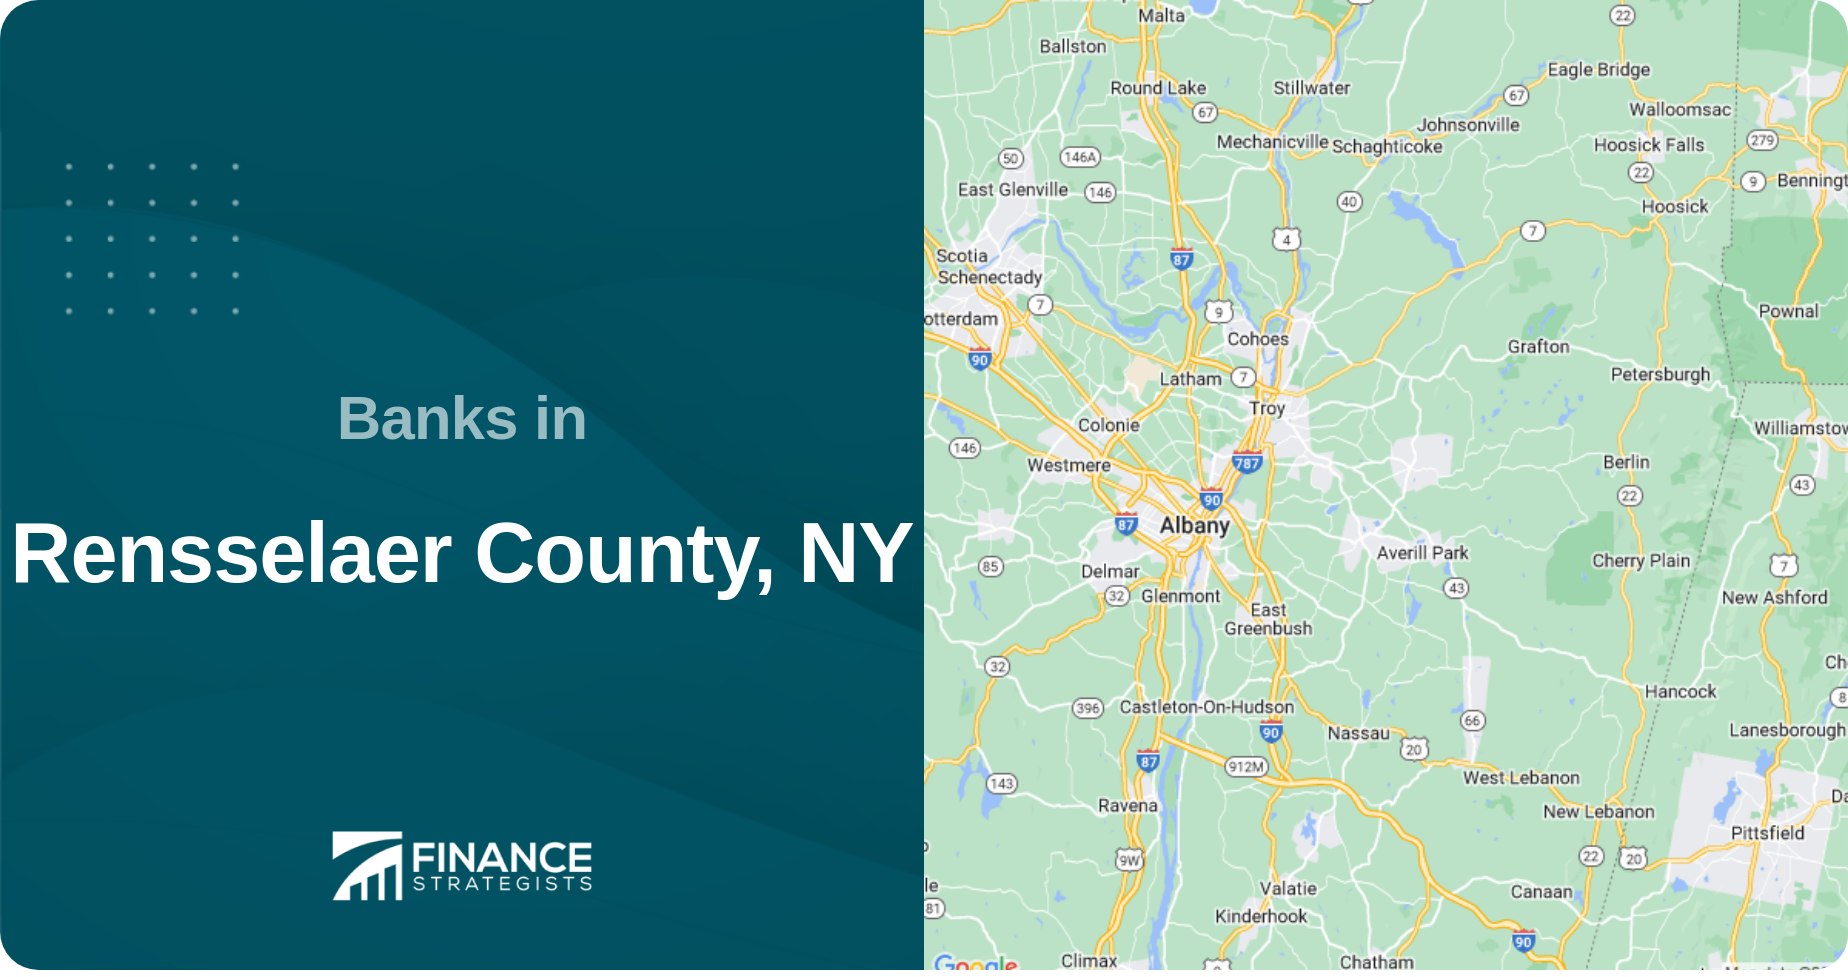 Banks in Rensselaer County, NY